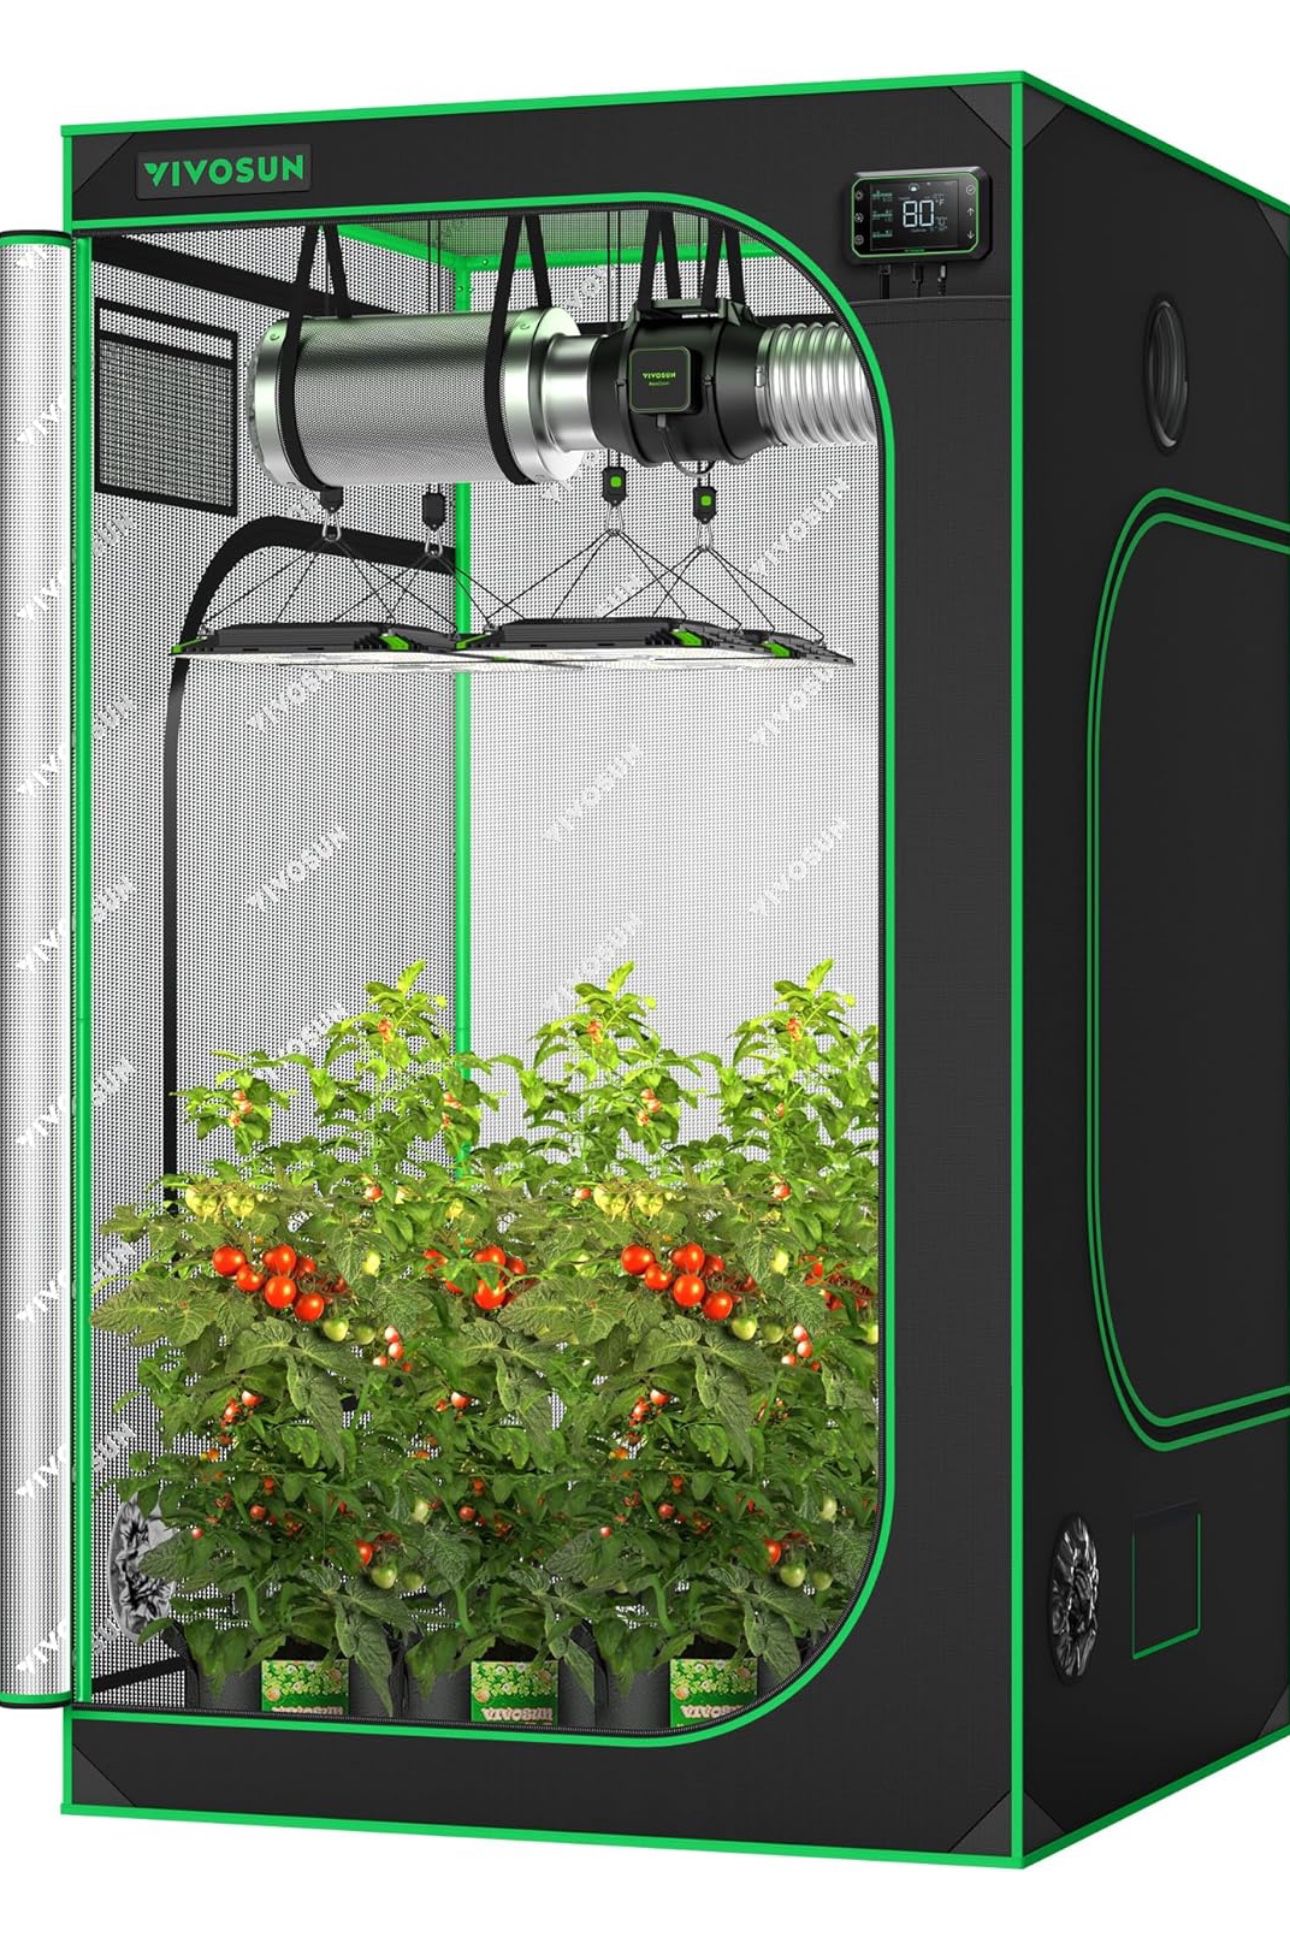 VIVOSUN S558 5x5 Grow Tent, 60"x60"x80" High Reflective Mylar with Observation Window and Floor Tray for Hydroponics Indoor Plant for VSF6450